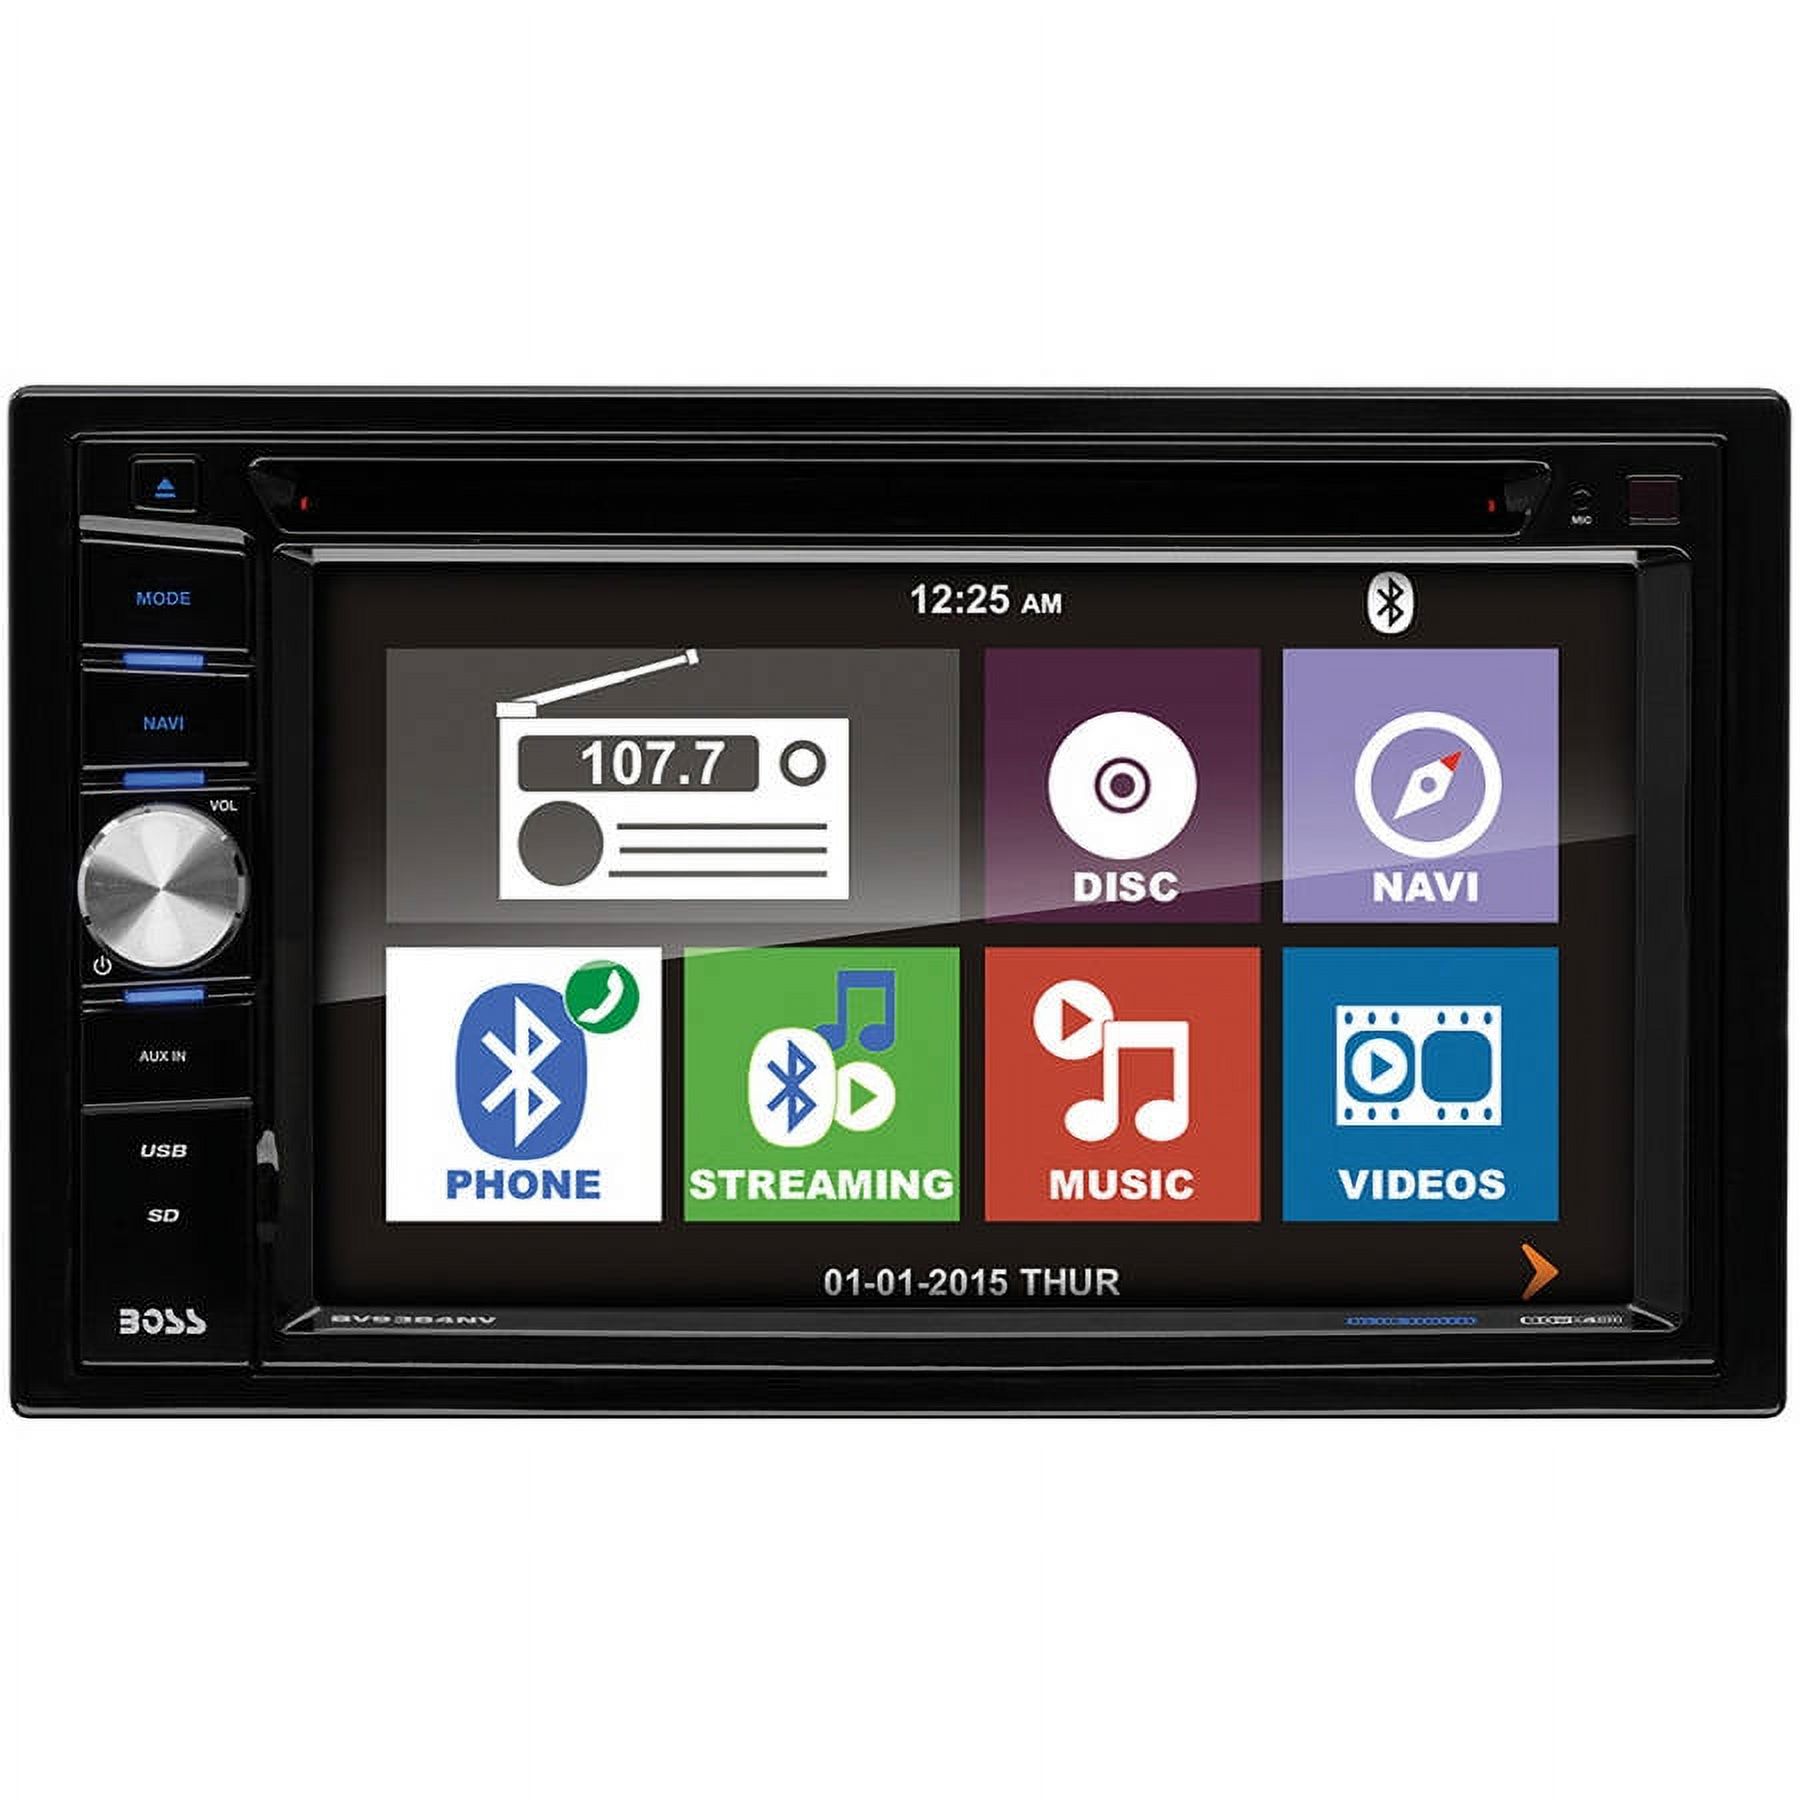 BOSS Audio Systems BV9384NV GPS Car Audio Stereo System - 6.2 inch Double Din, Touchscreen, Bluetooth Audio and Calling Head Unit, AM/FM Radio Receiver, CD Player, USB, Hook up to Amplifier - image 3 of 18